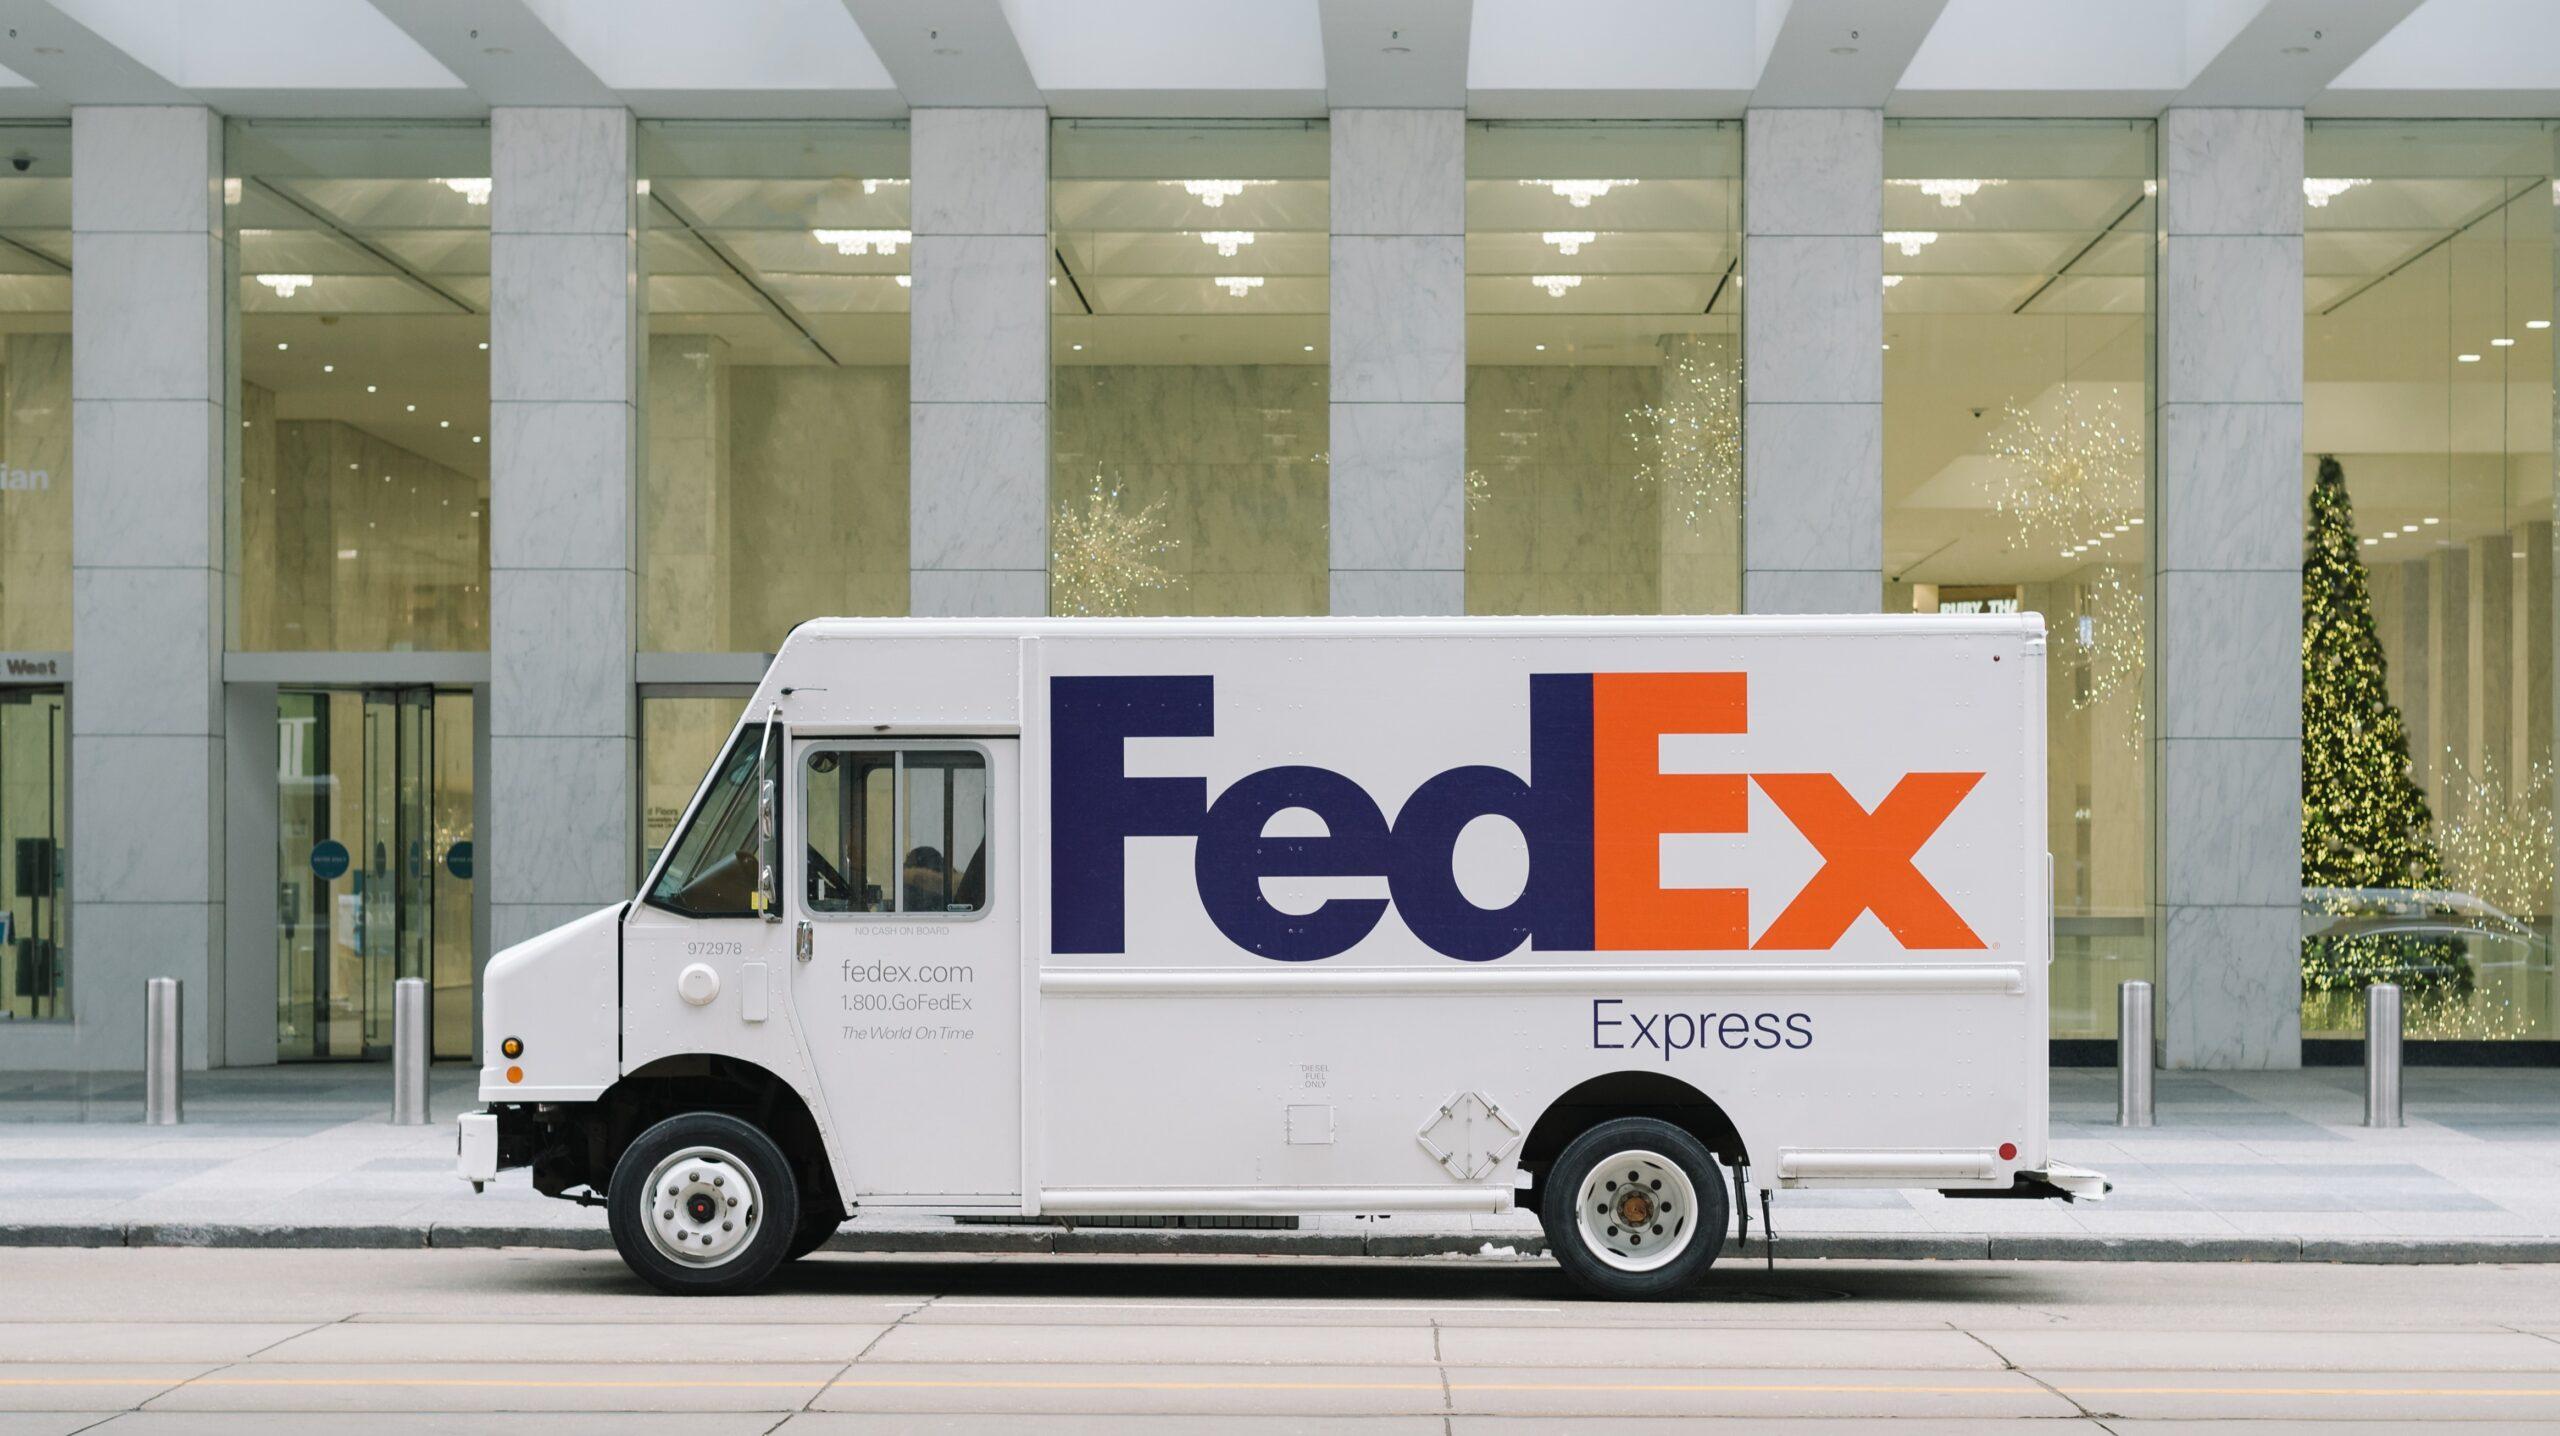 A FedEx van parked outside an office building.